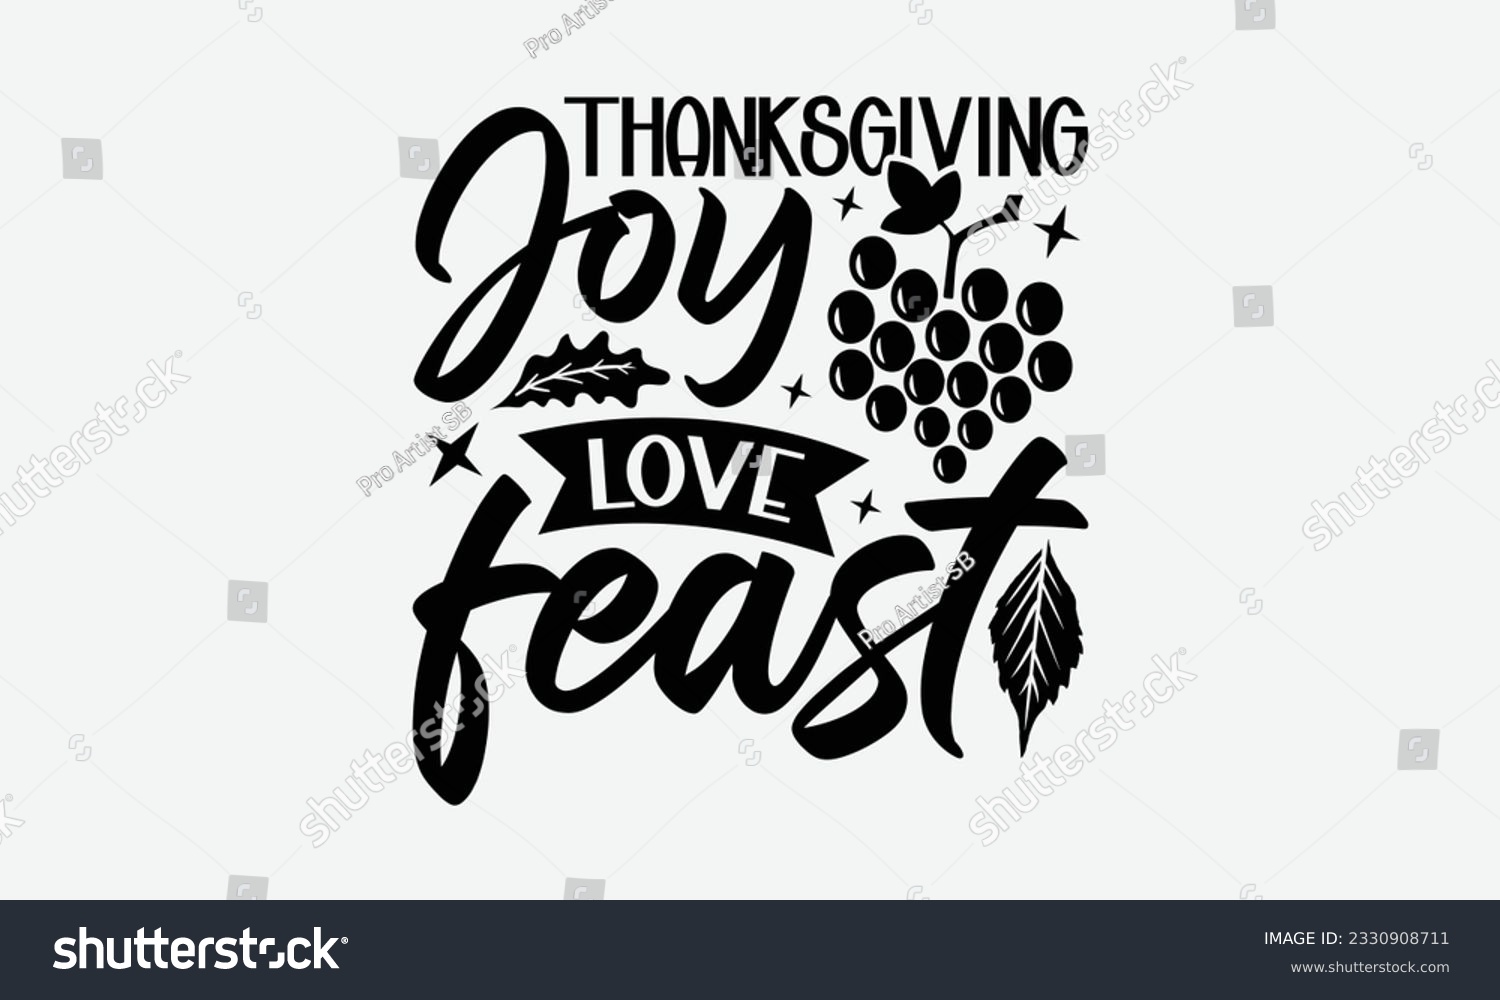 SVG of Thanksgiving Joy Love Feast - Thanksgiving T-shirt Design Template, Thanksgiving Quotes File, Hand Drawn Lettering Phrase, SVG Files for Cutting Cricut and Silhouette. svg